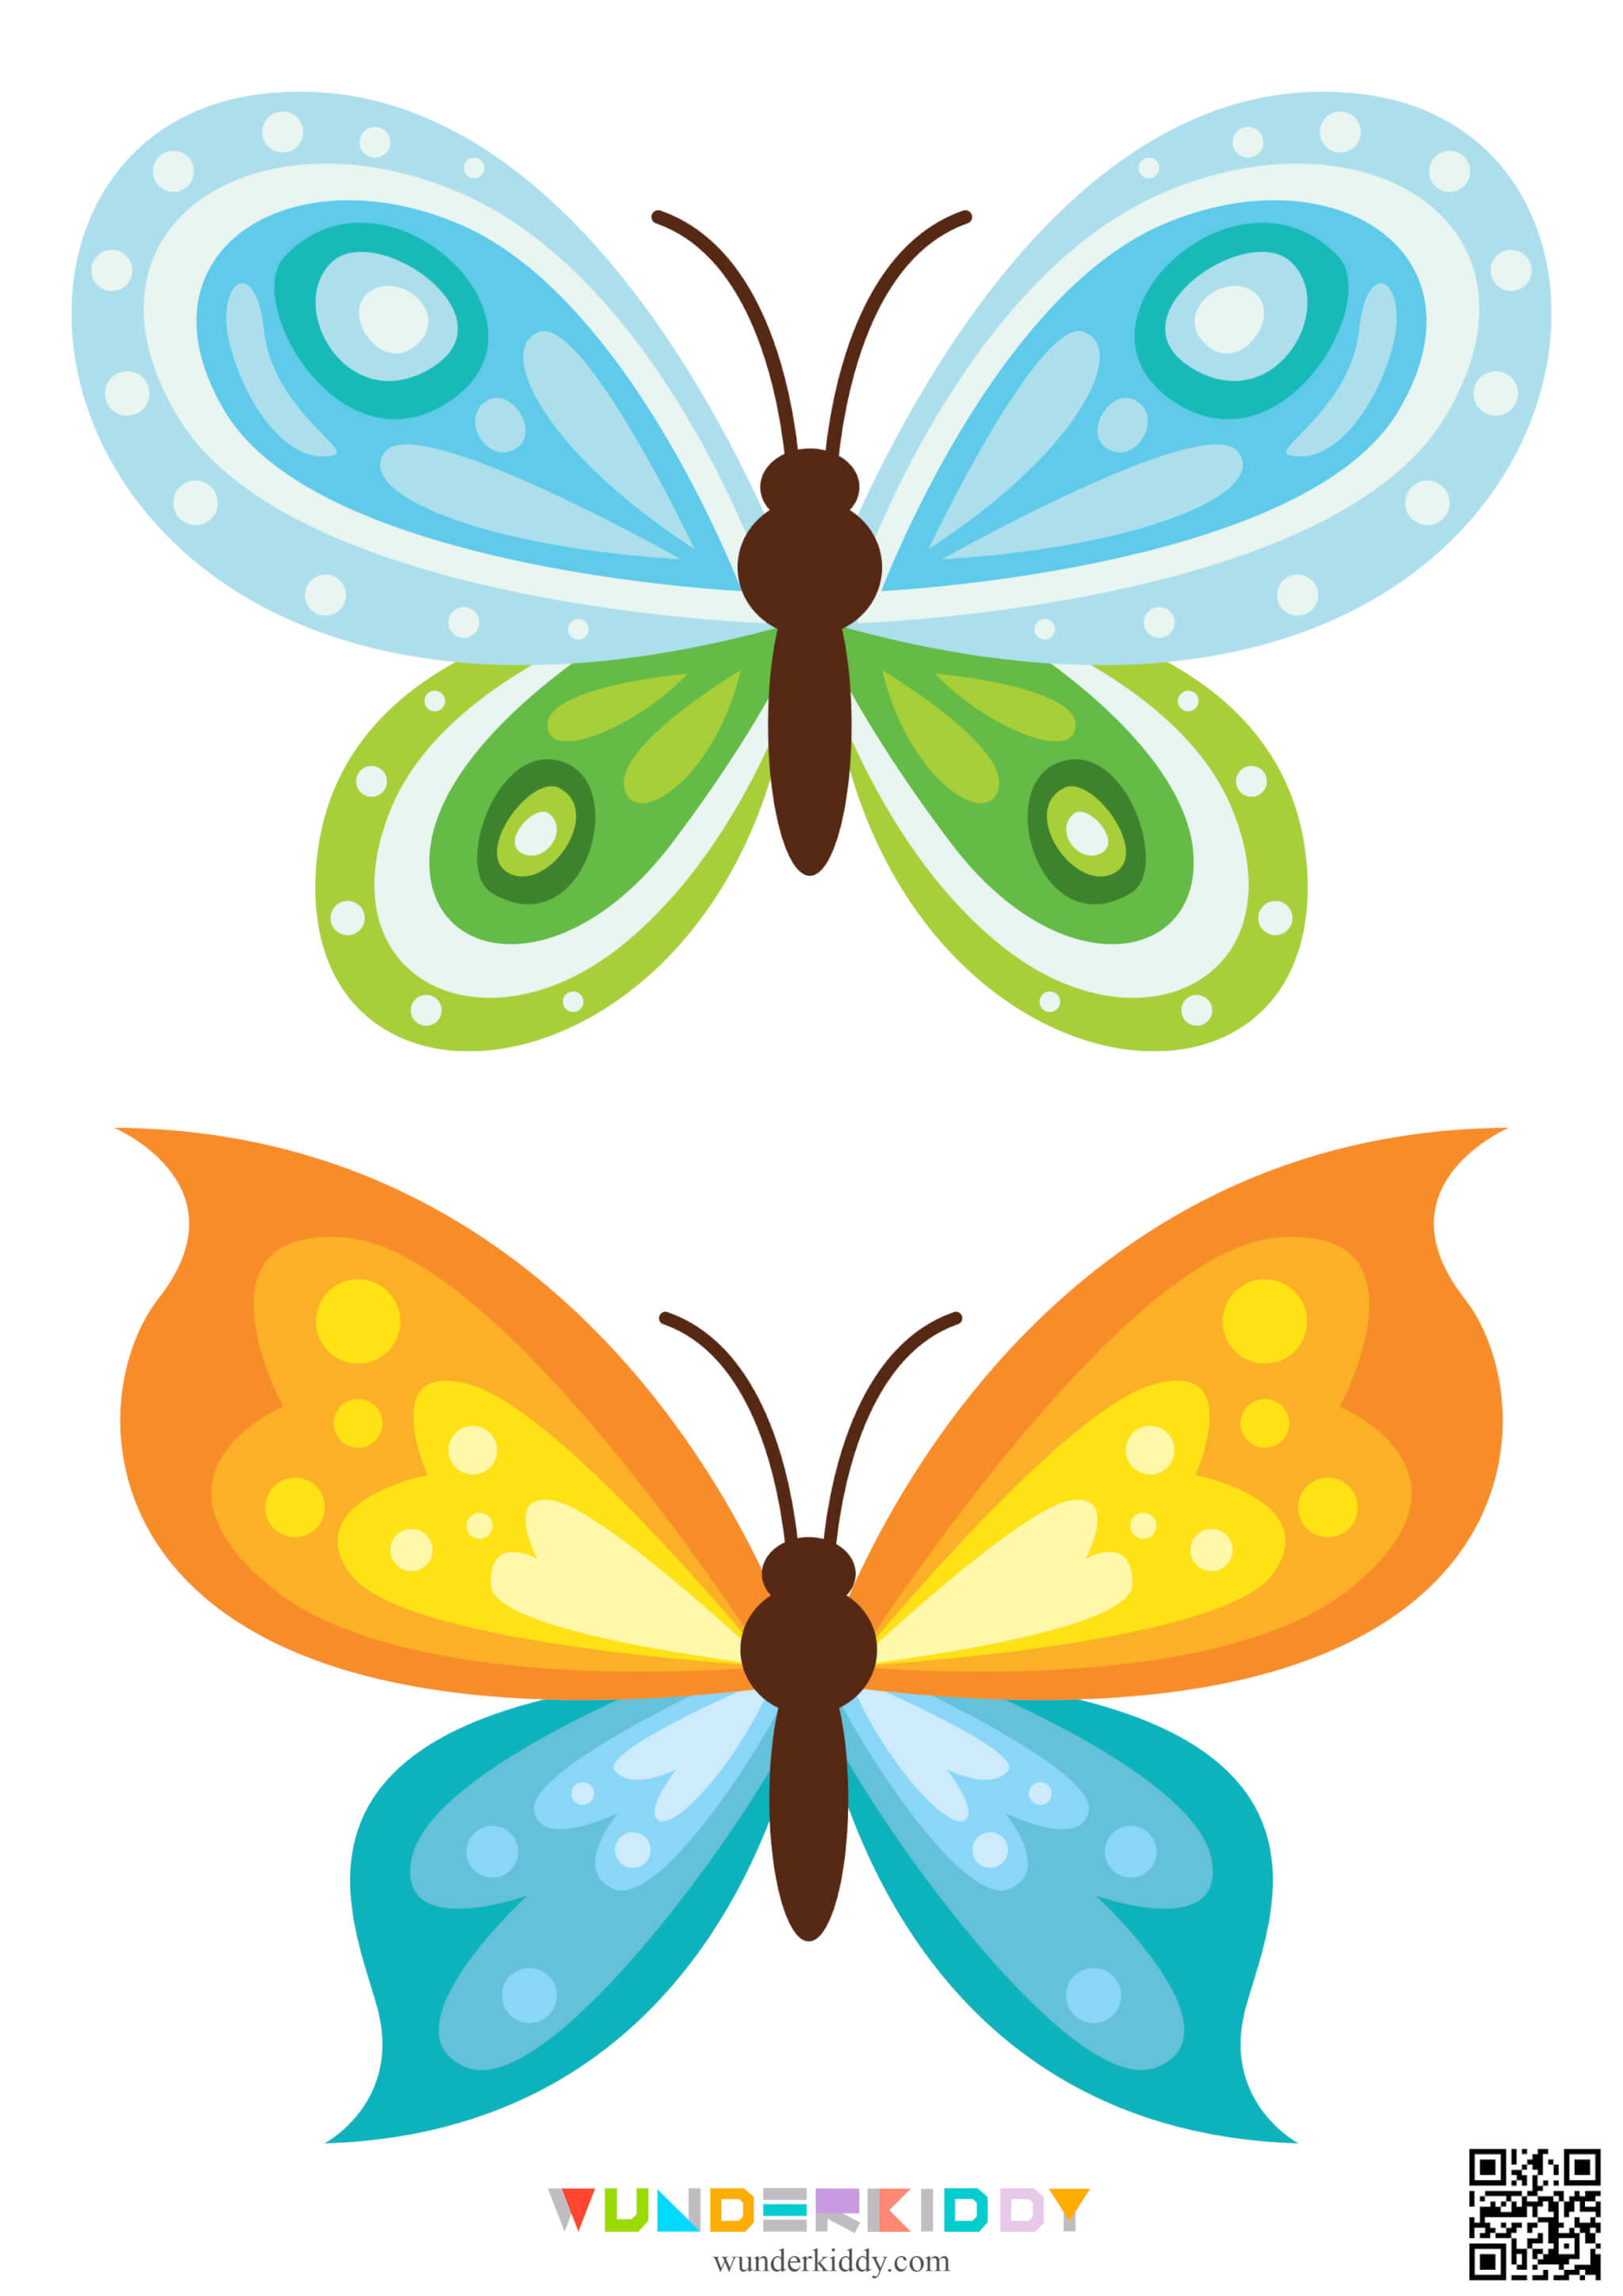 Free Printable Butterfly Templates - Image 2